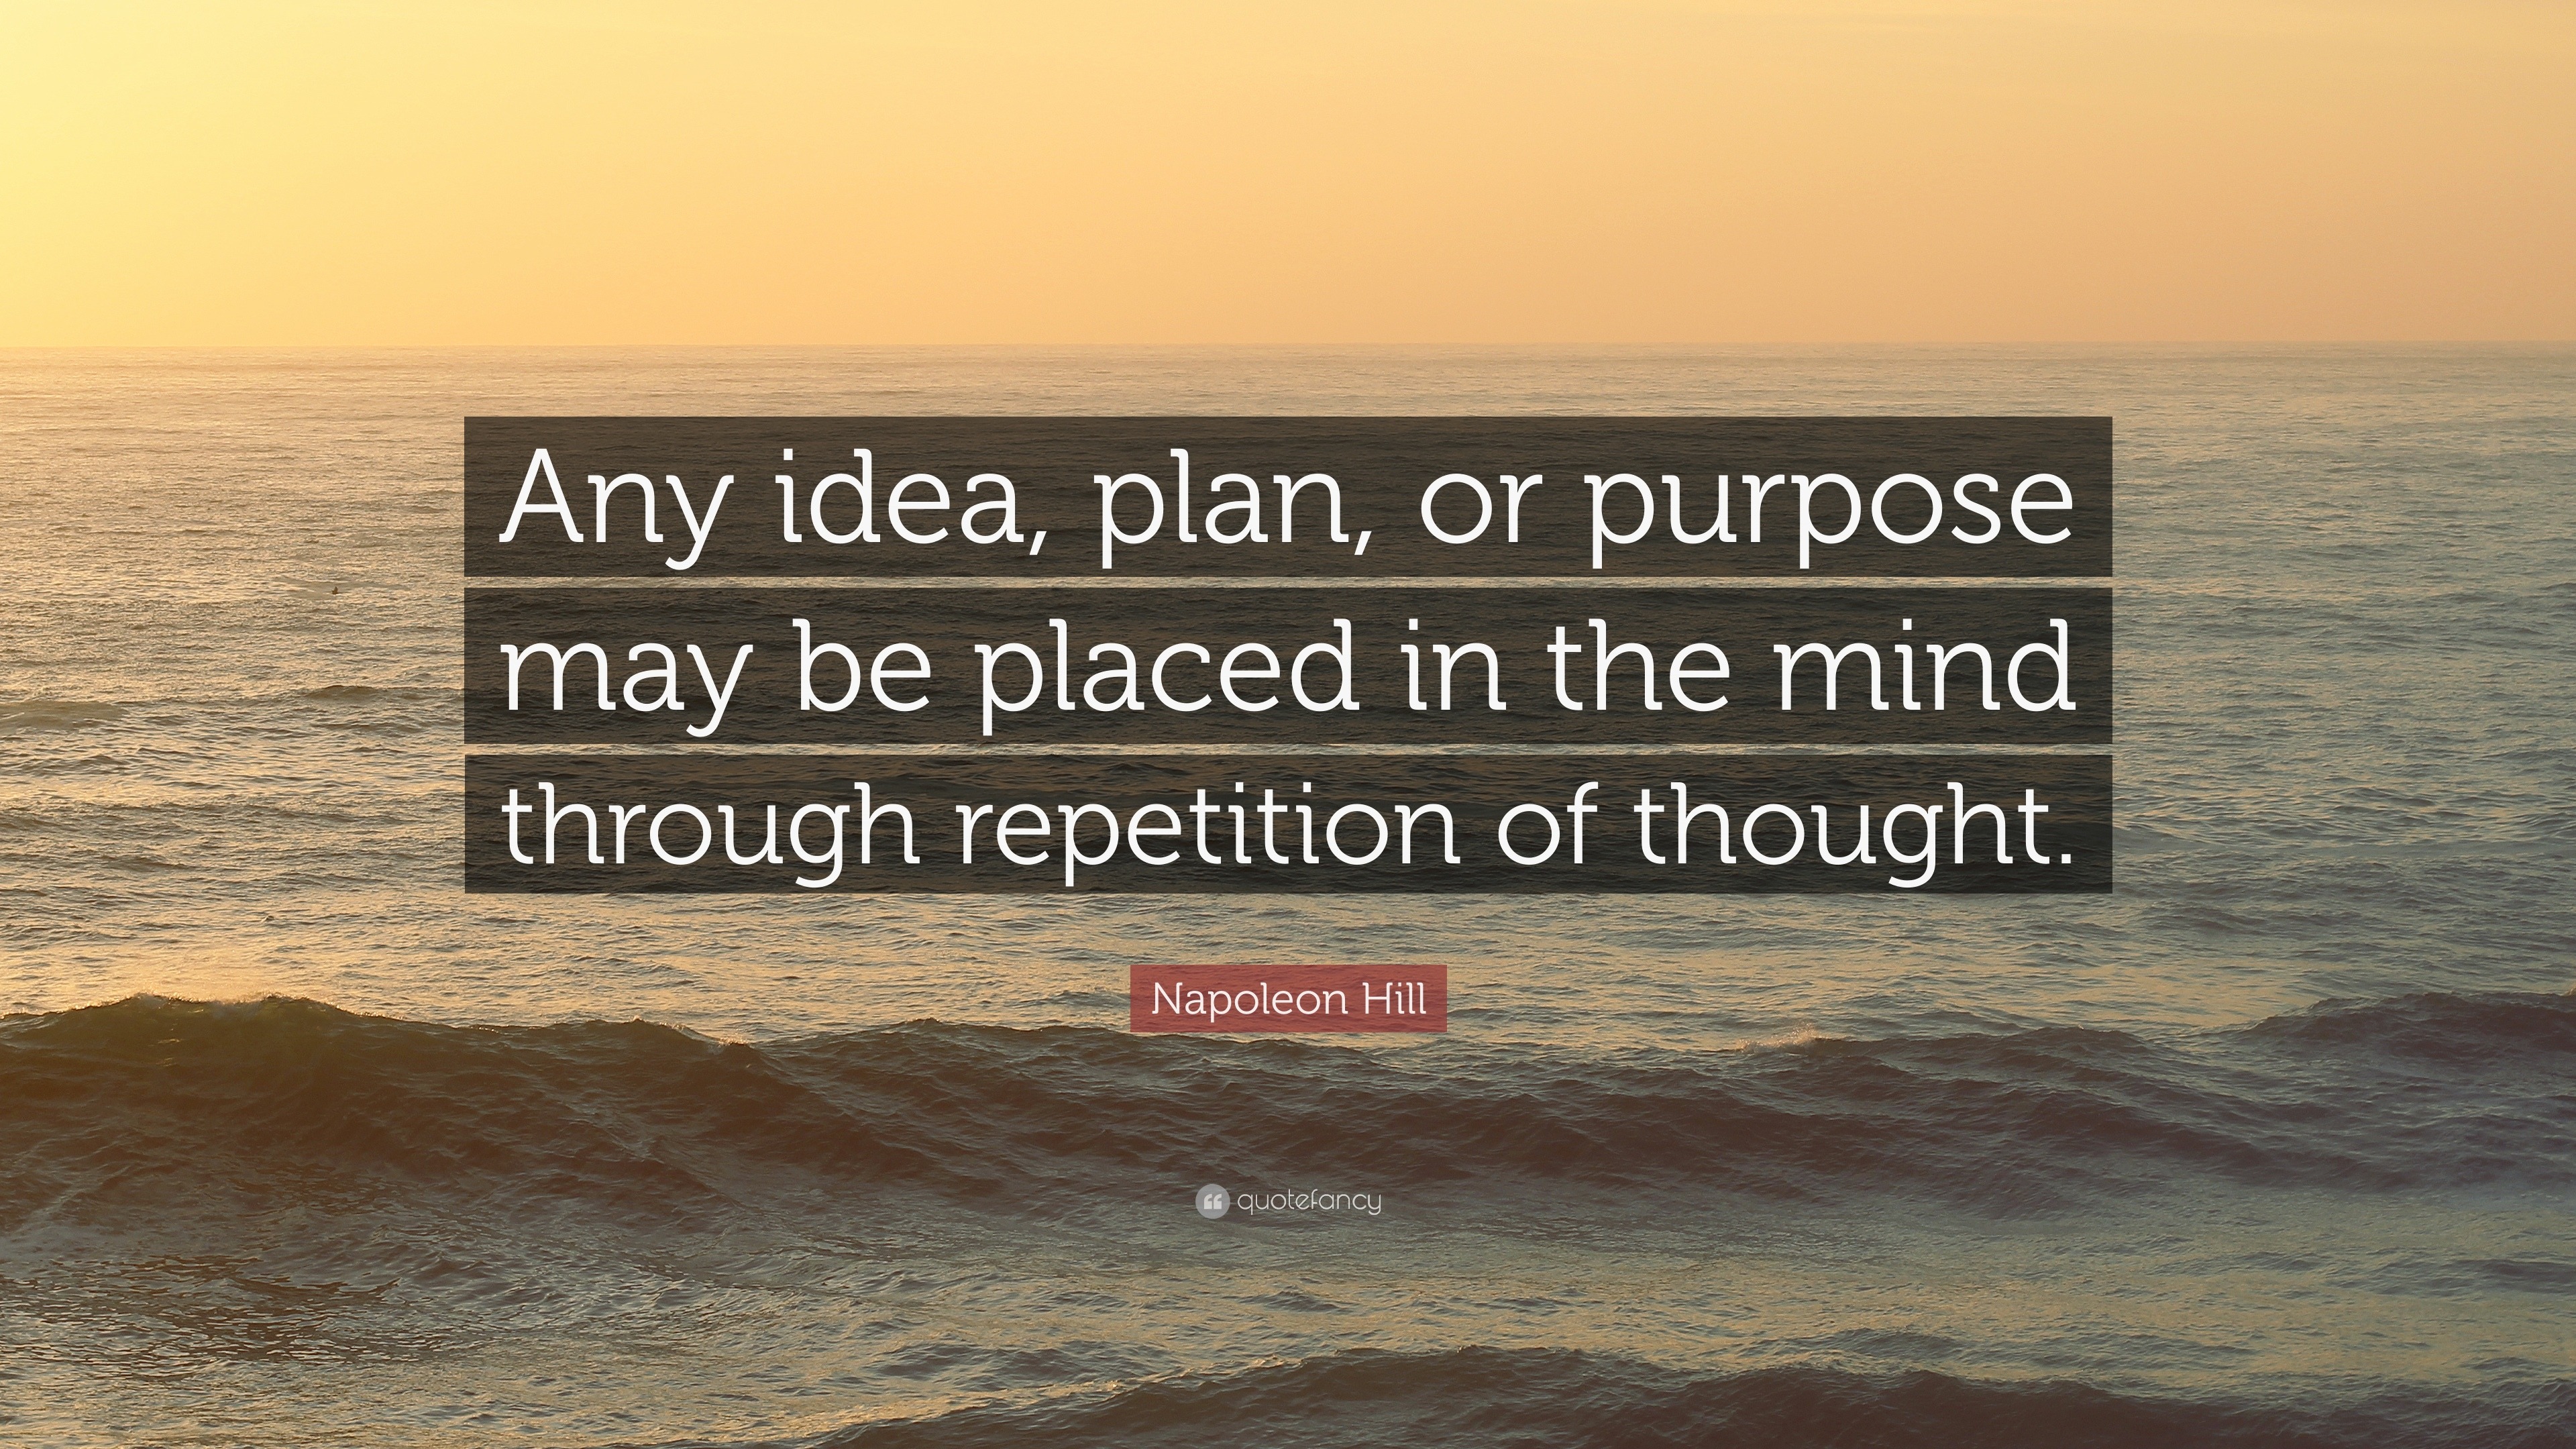 Napoleon Hill - Any idea, plan, or purpose may be placed